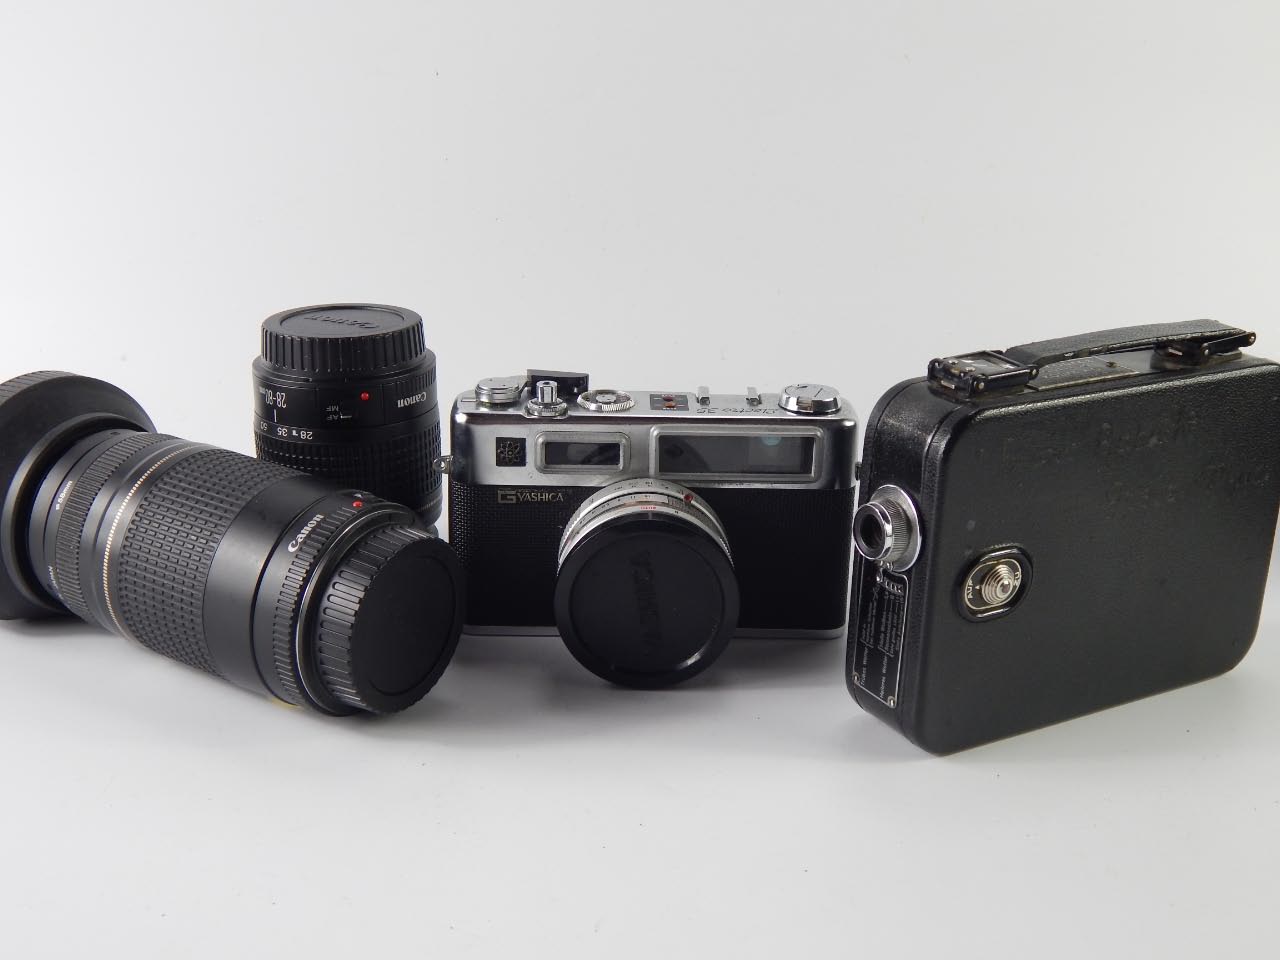 A Yashica G Electro 35 SLR camera, Canon 75-300mm zoom lens, Canon 28-80mm Skylight lens, and Cine